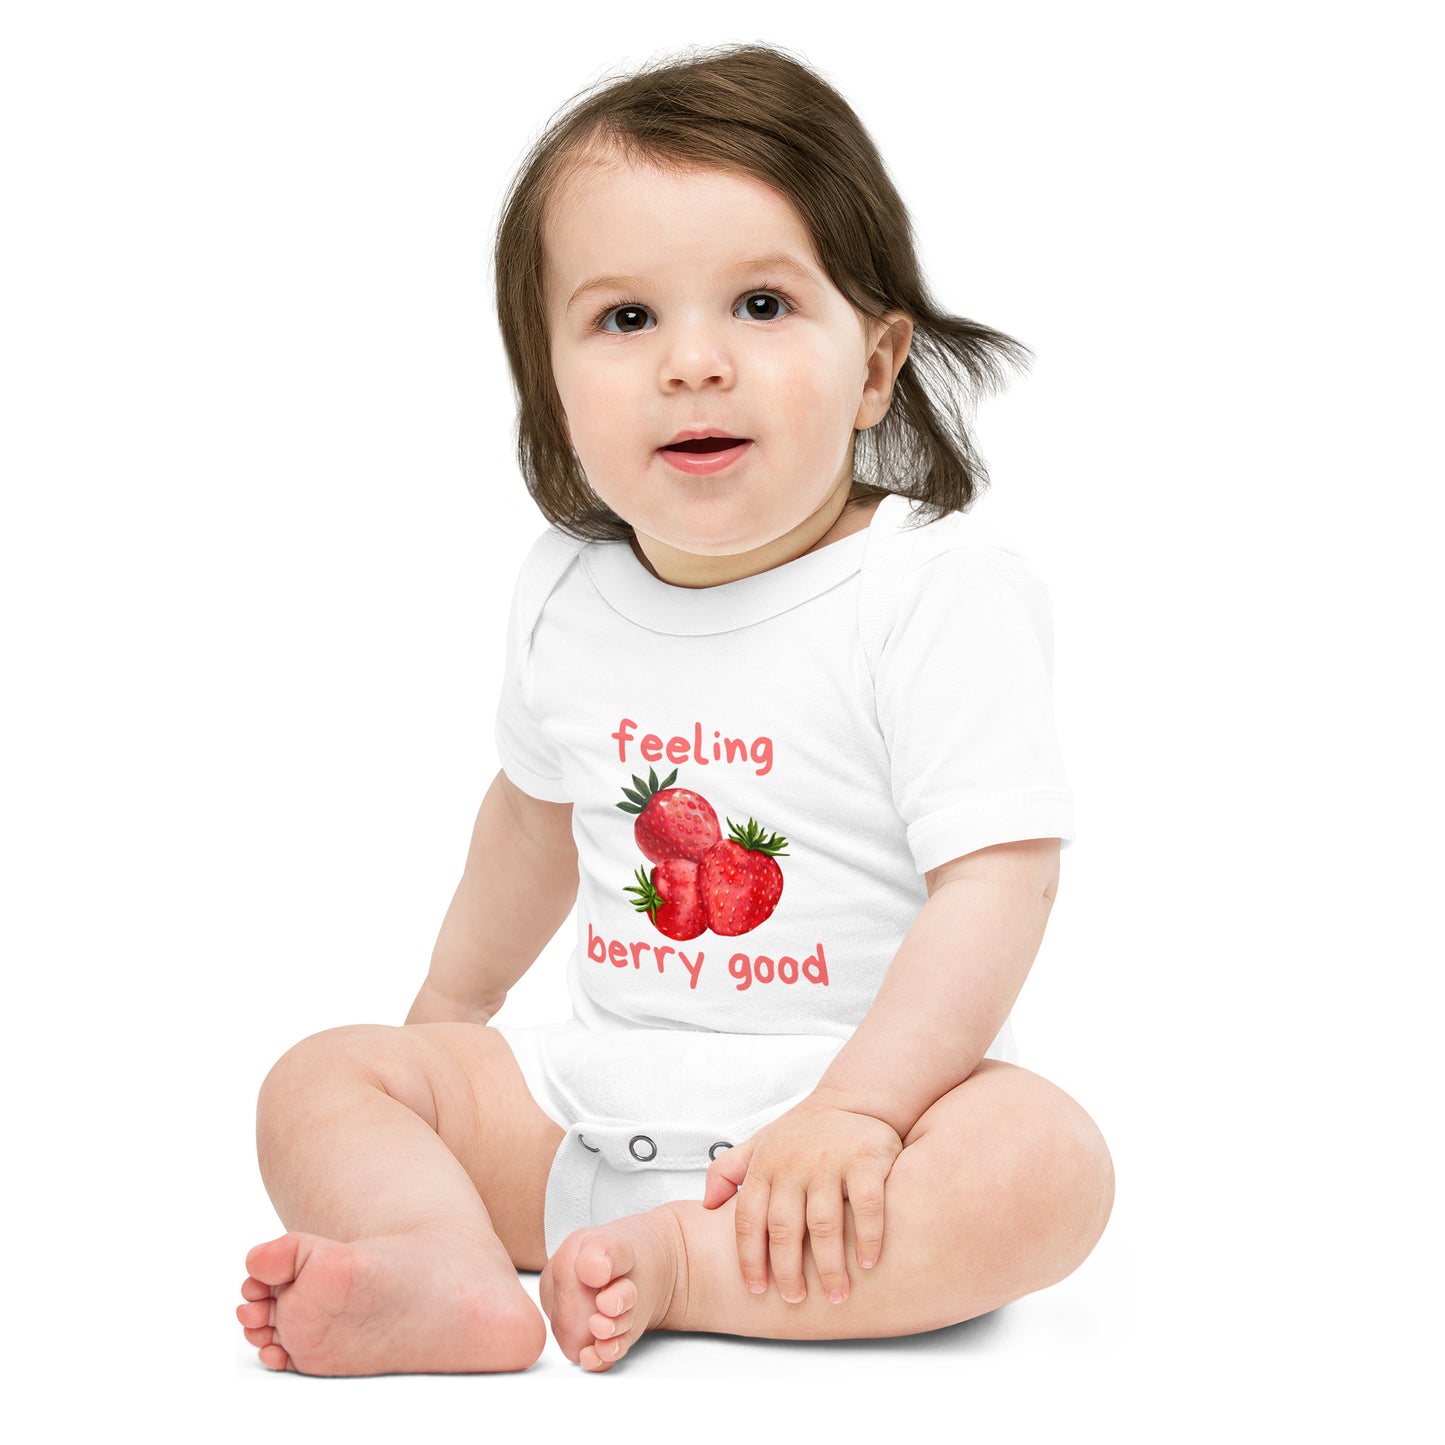 strawberry shirt for baby gifts, babyshwoer gift ideas, strawberry shirt for baby registry, summer outfit, spring outfit, baby summer bubble outfit